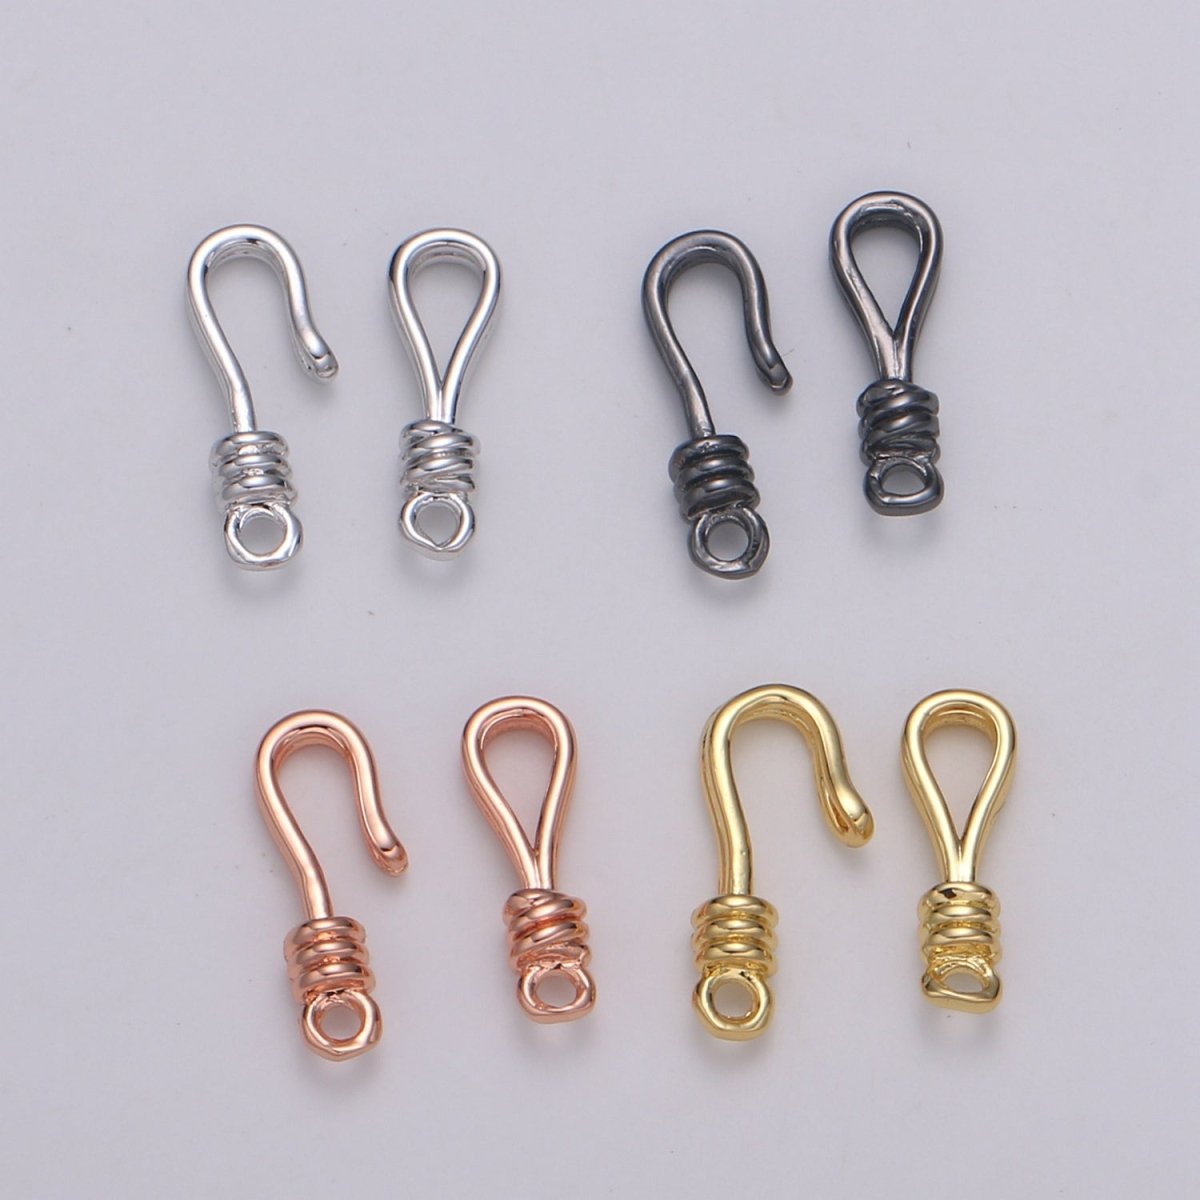 Round Leather Hook Clasp Gold Filled Jewelry Making Supplies K-645 K-647-K-648 - DLUXCA